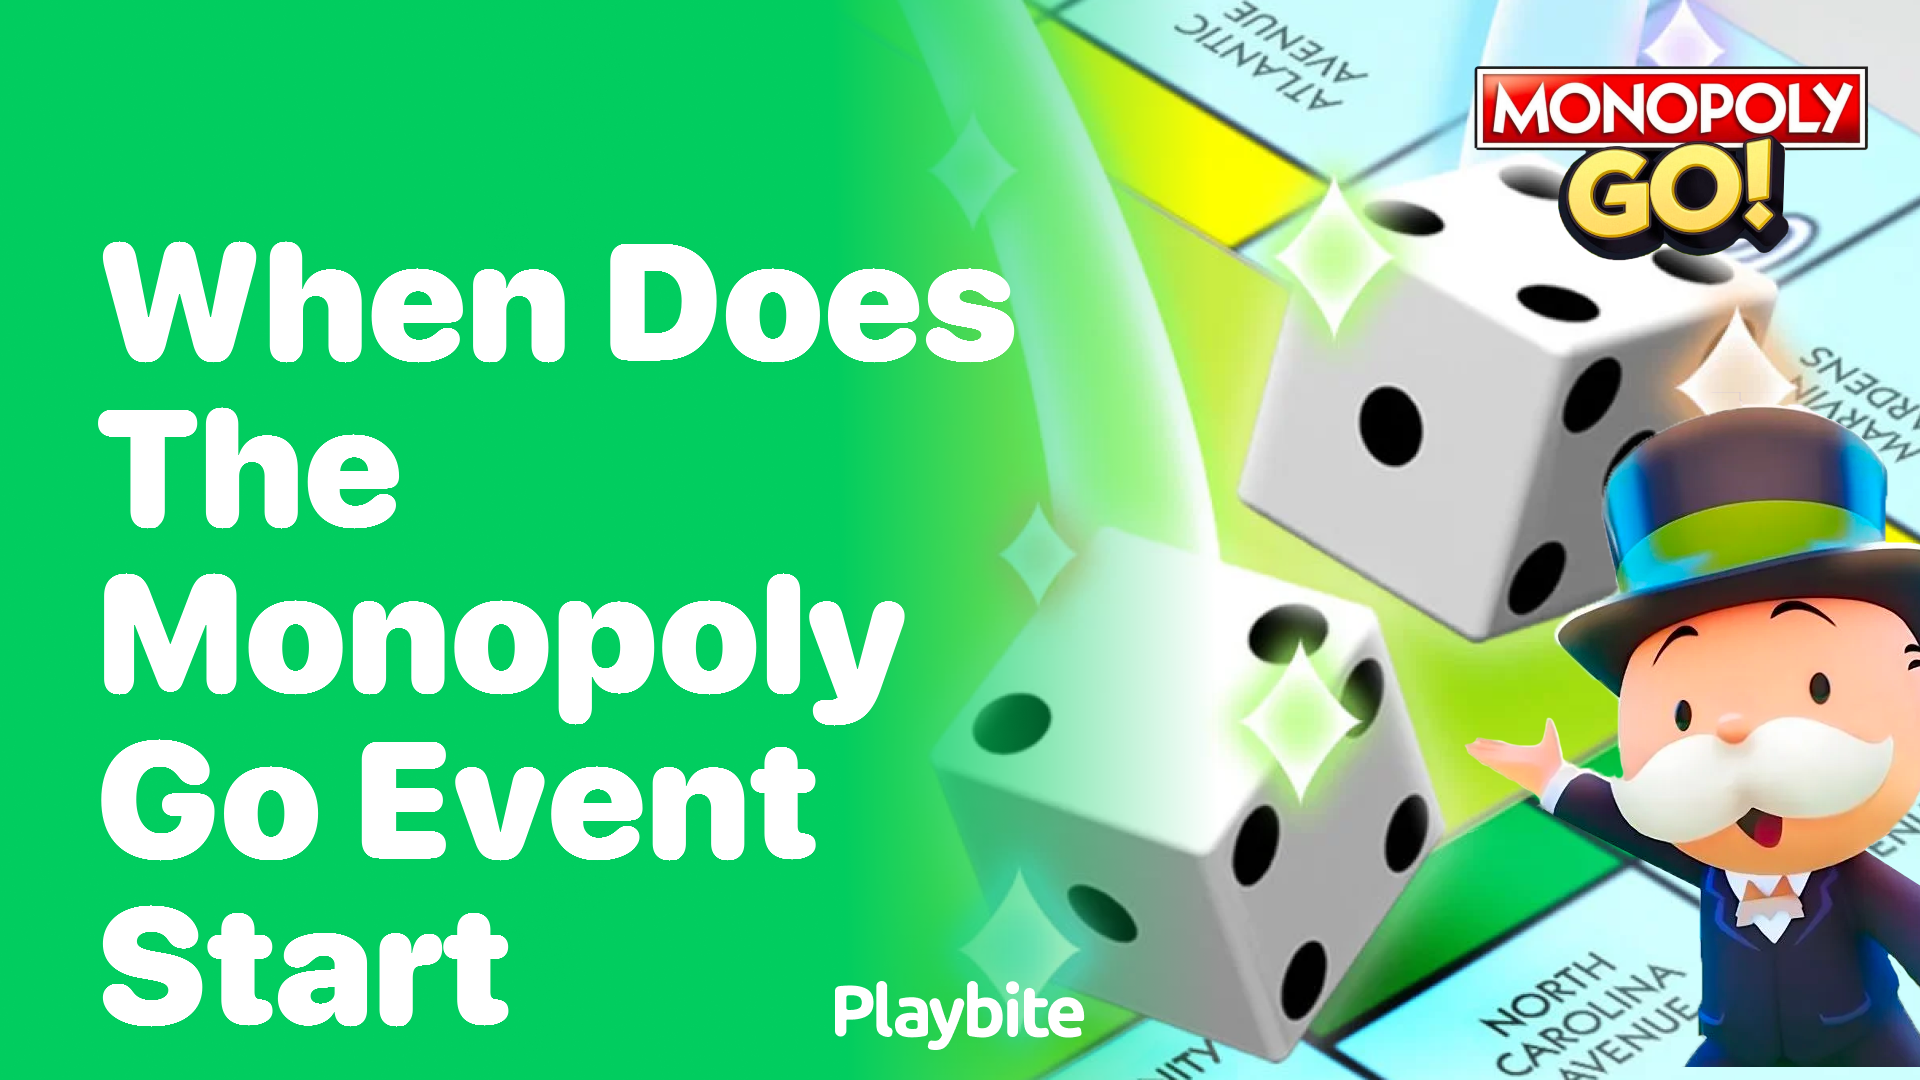 When Does the Monopoly Go Event Start? Find Out Here!